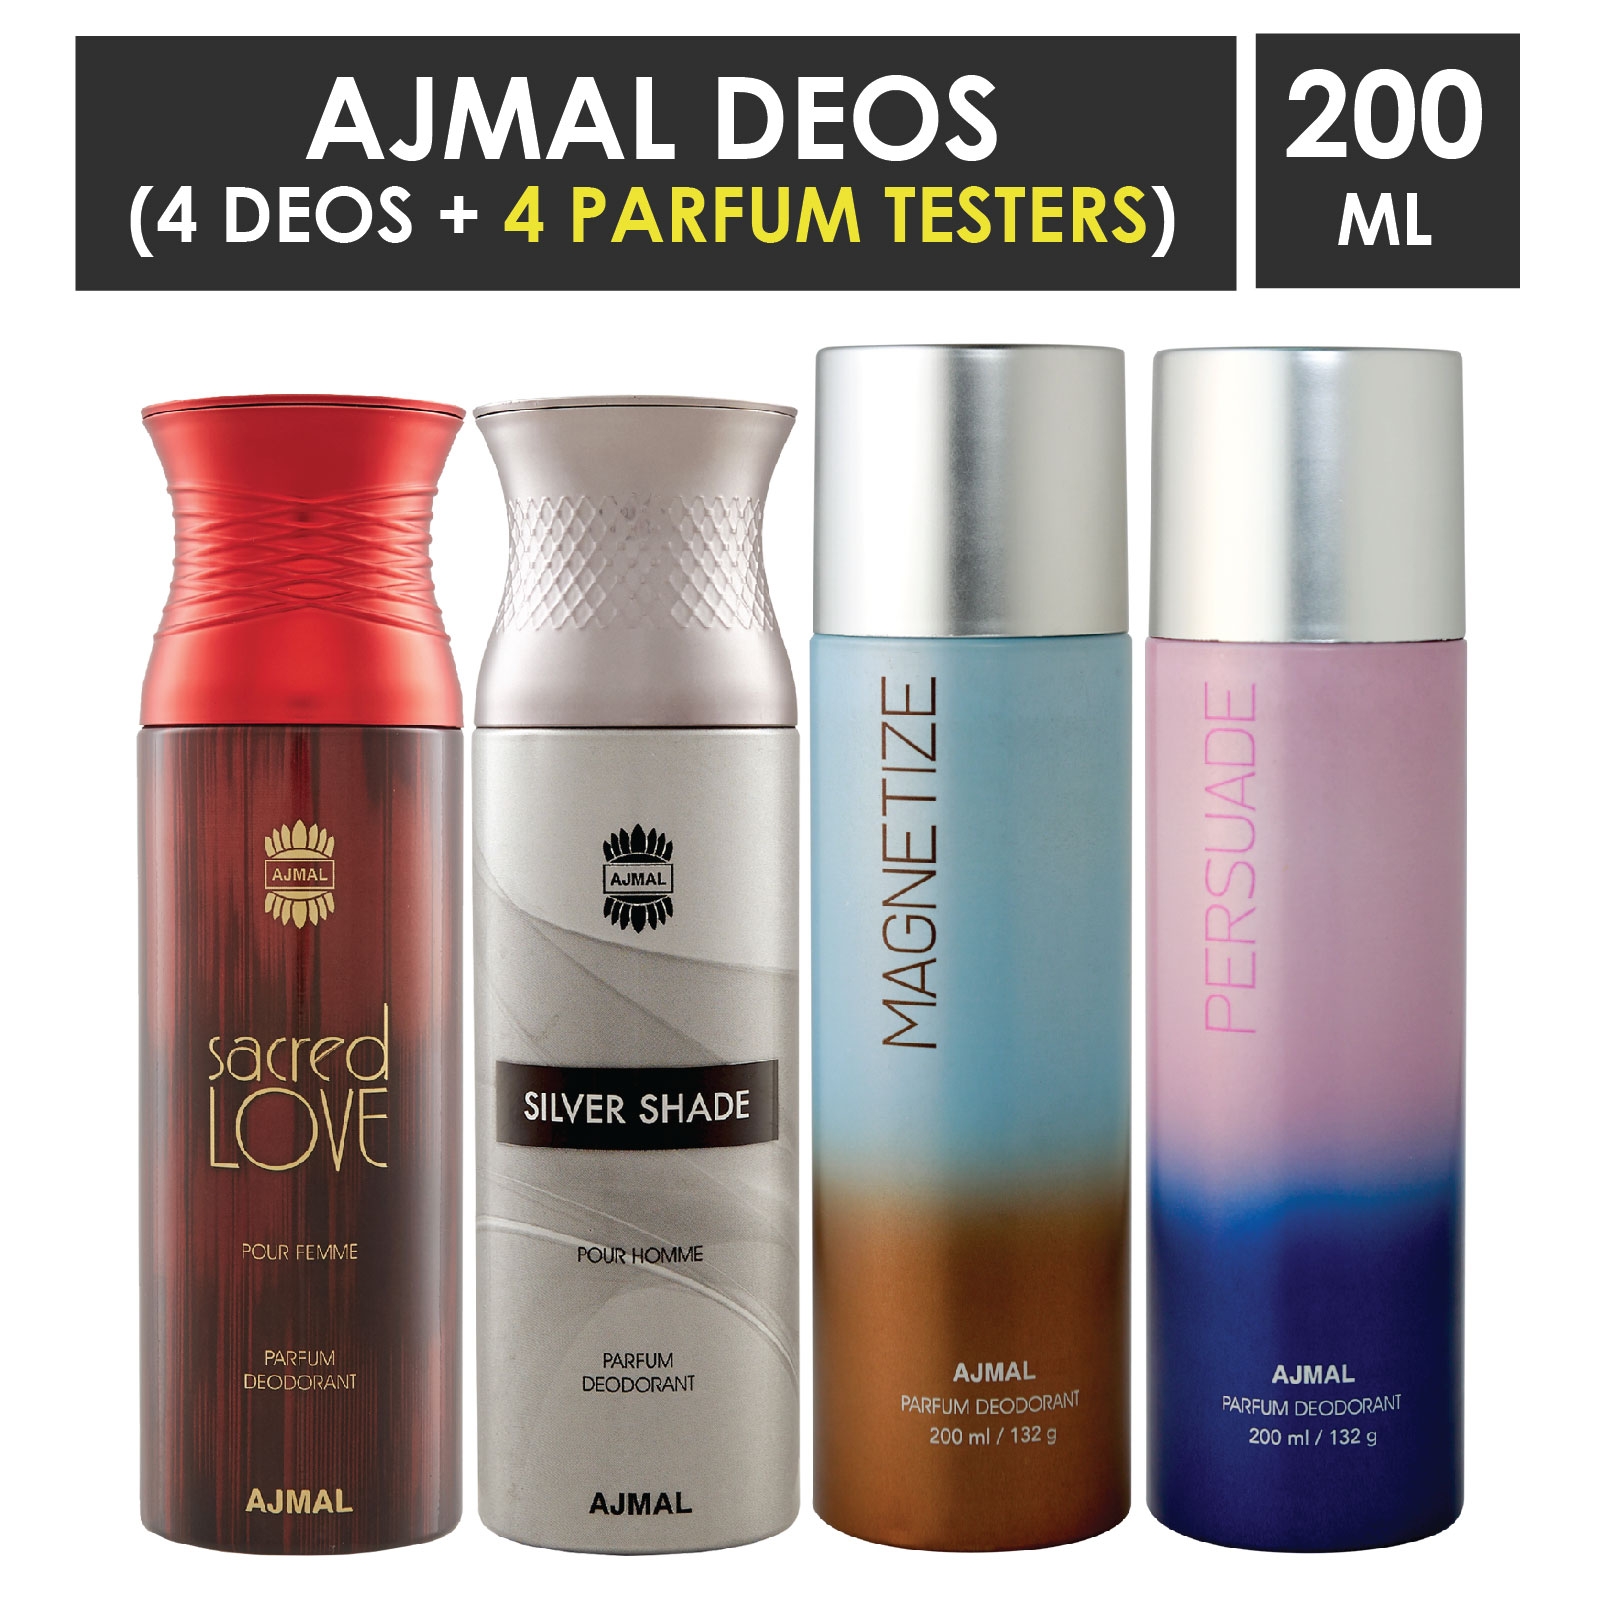 Ajmal | Ajmal 1 Sacred Love for Women, 1 Silver Shade for Men, 1 Magnetize and 1 Persuade for Men & Women High Quality Deodorants each 200ML Combo pack of 4 (Total 800ML) + 4 Parfum Testers